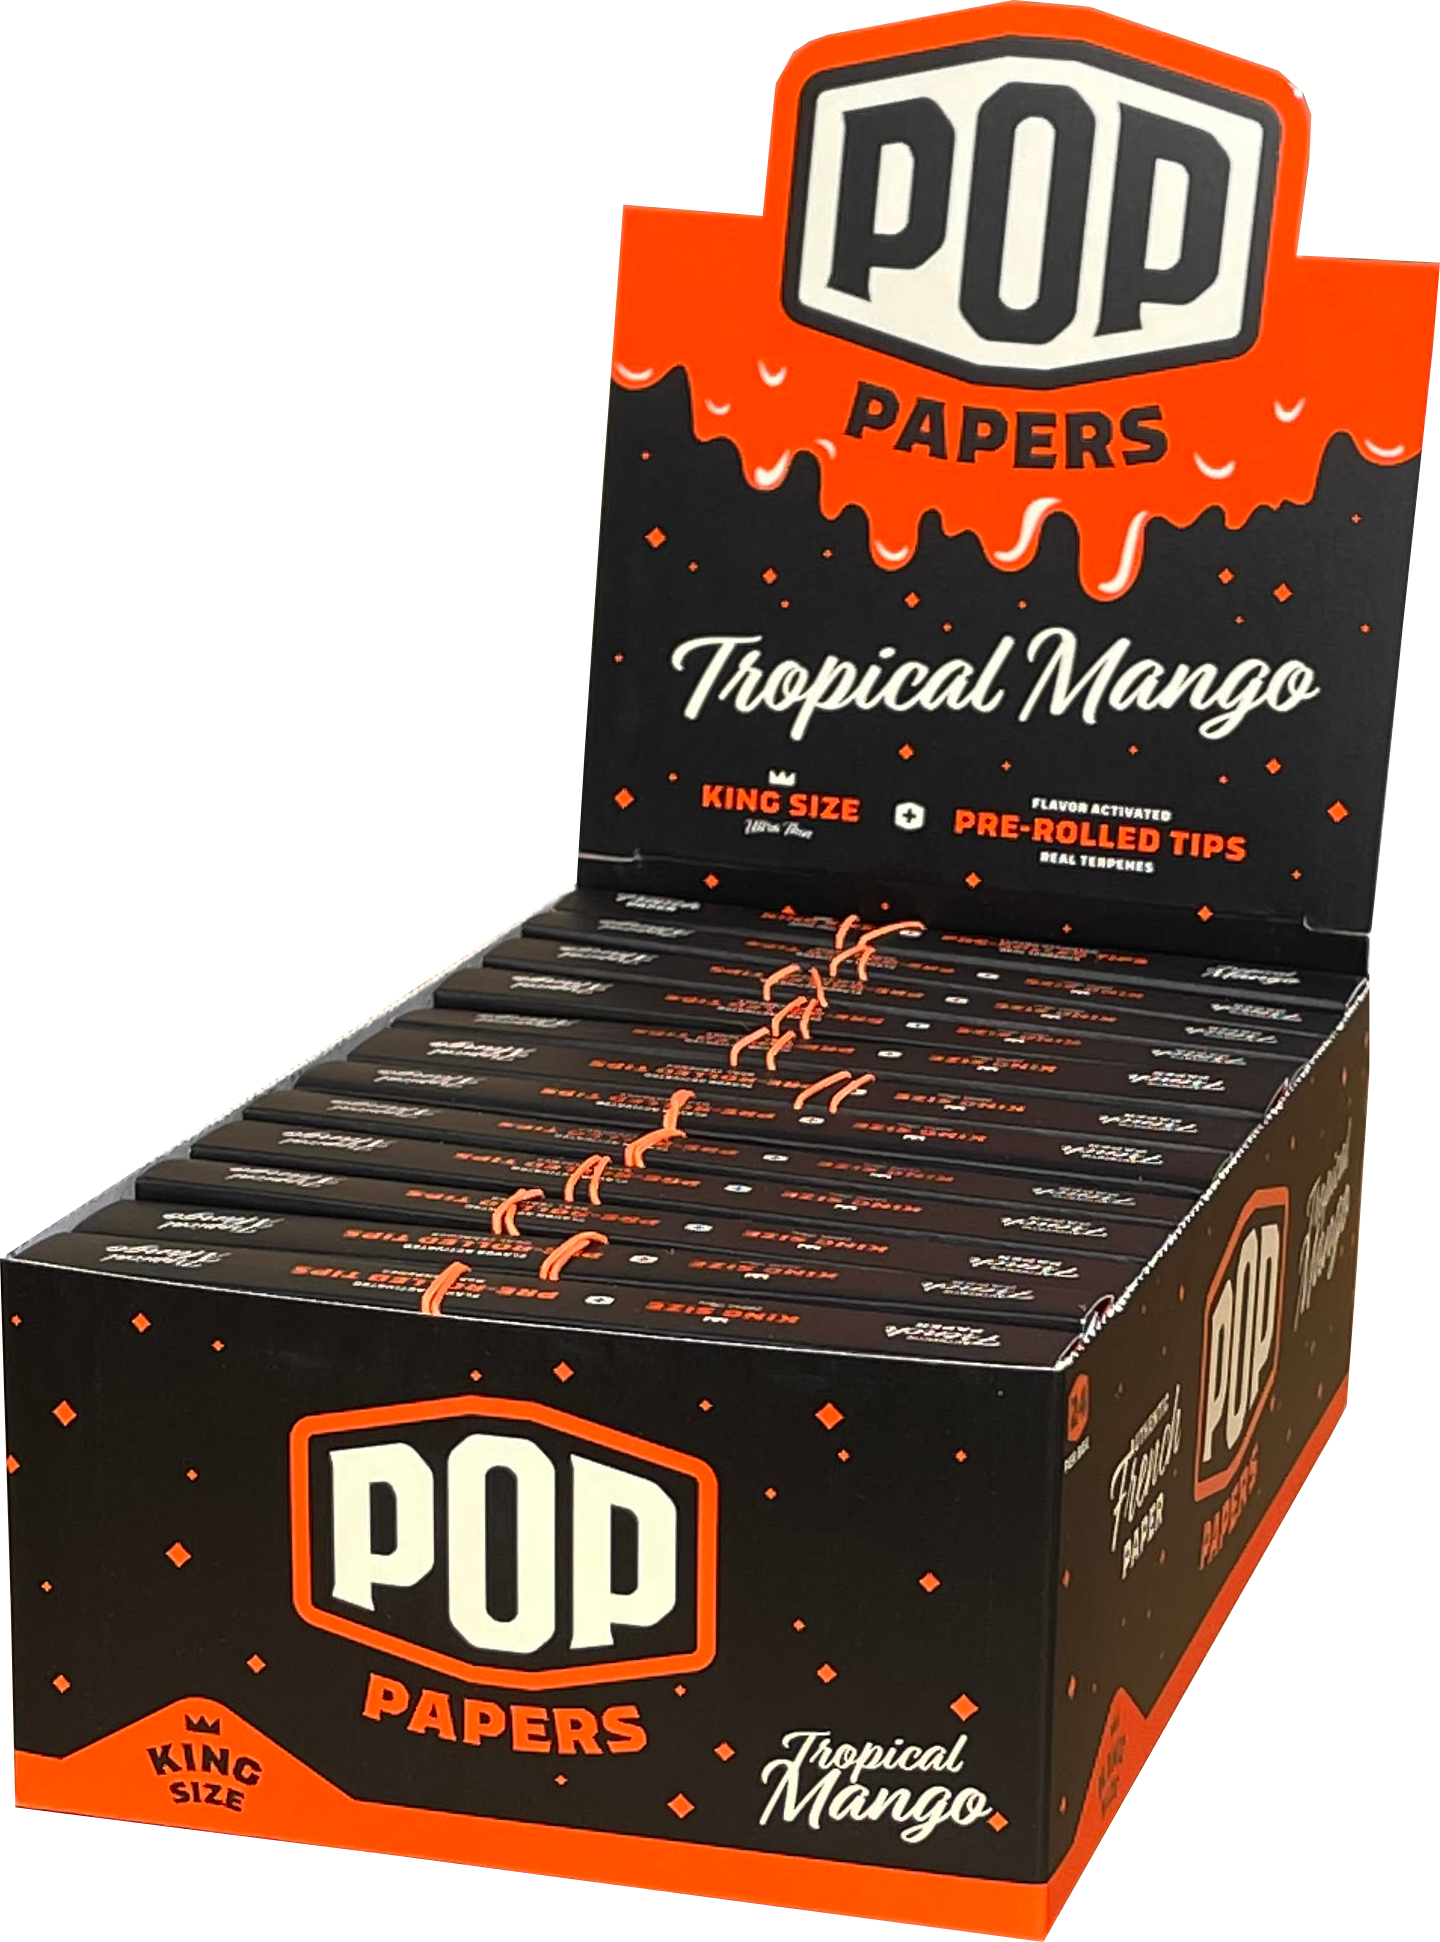 Pop Papers | Wholesale Ultra Thin King Size Rolling Paper w/ Flavor Filter Tips | 110mm - 24 Count - Various Flavors Rolling Papers Biohazard Inc   